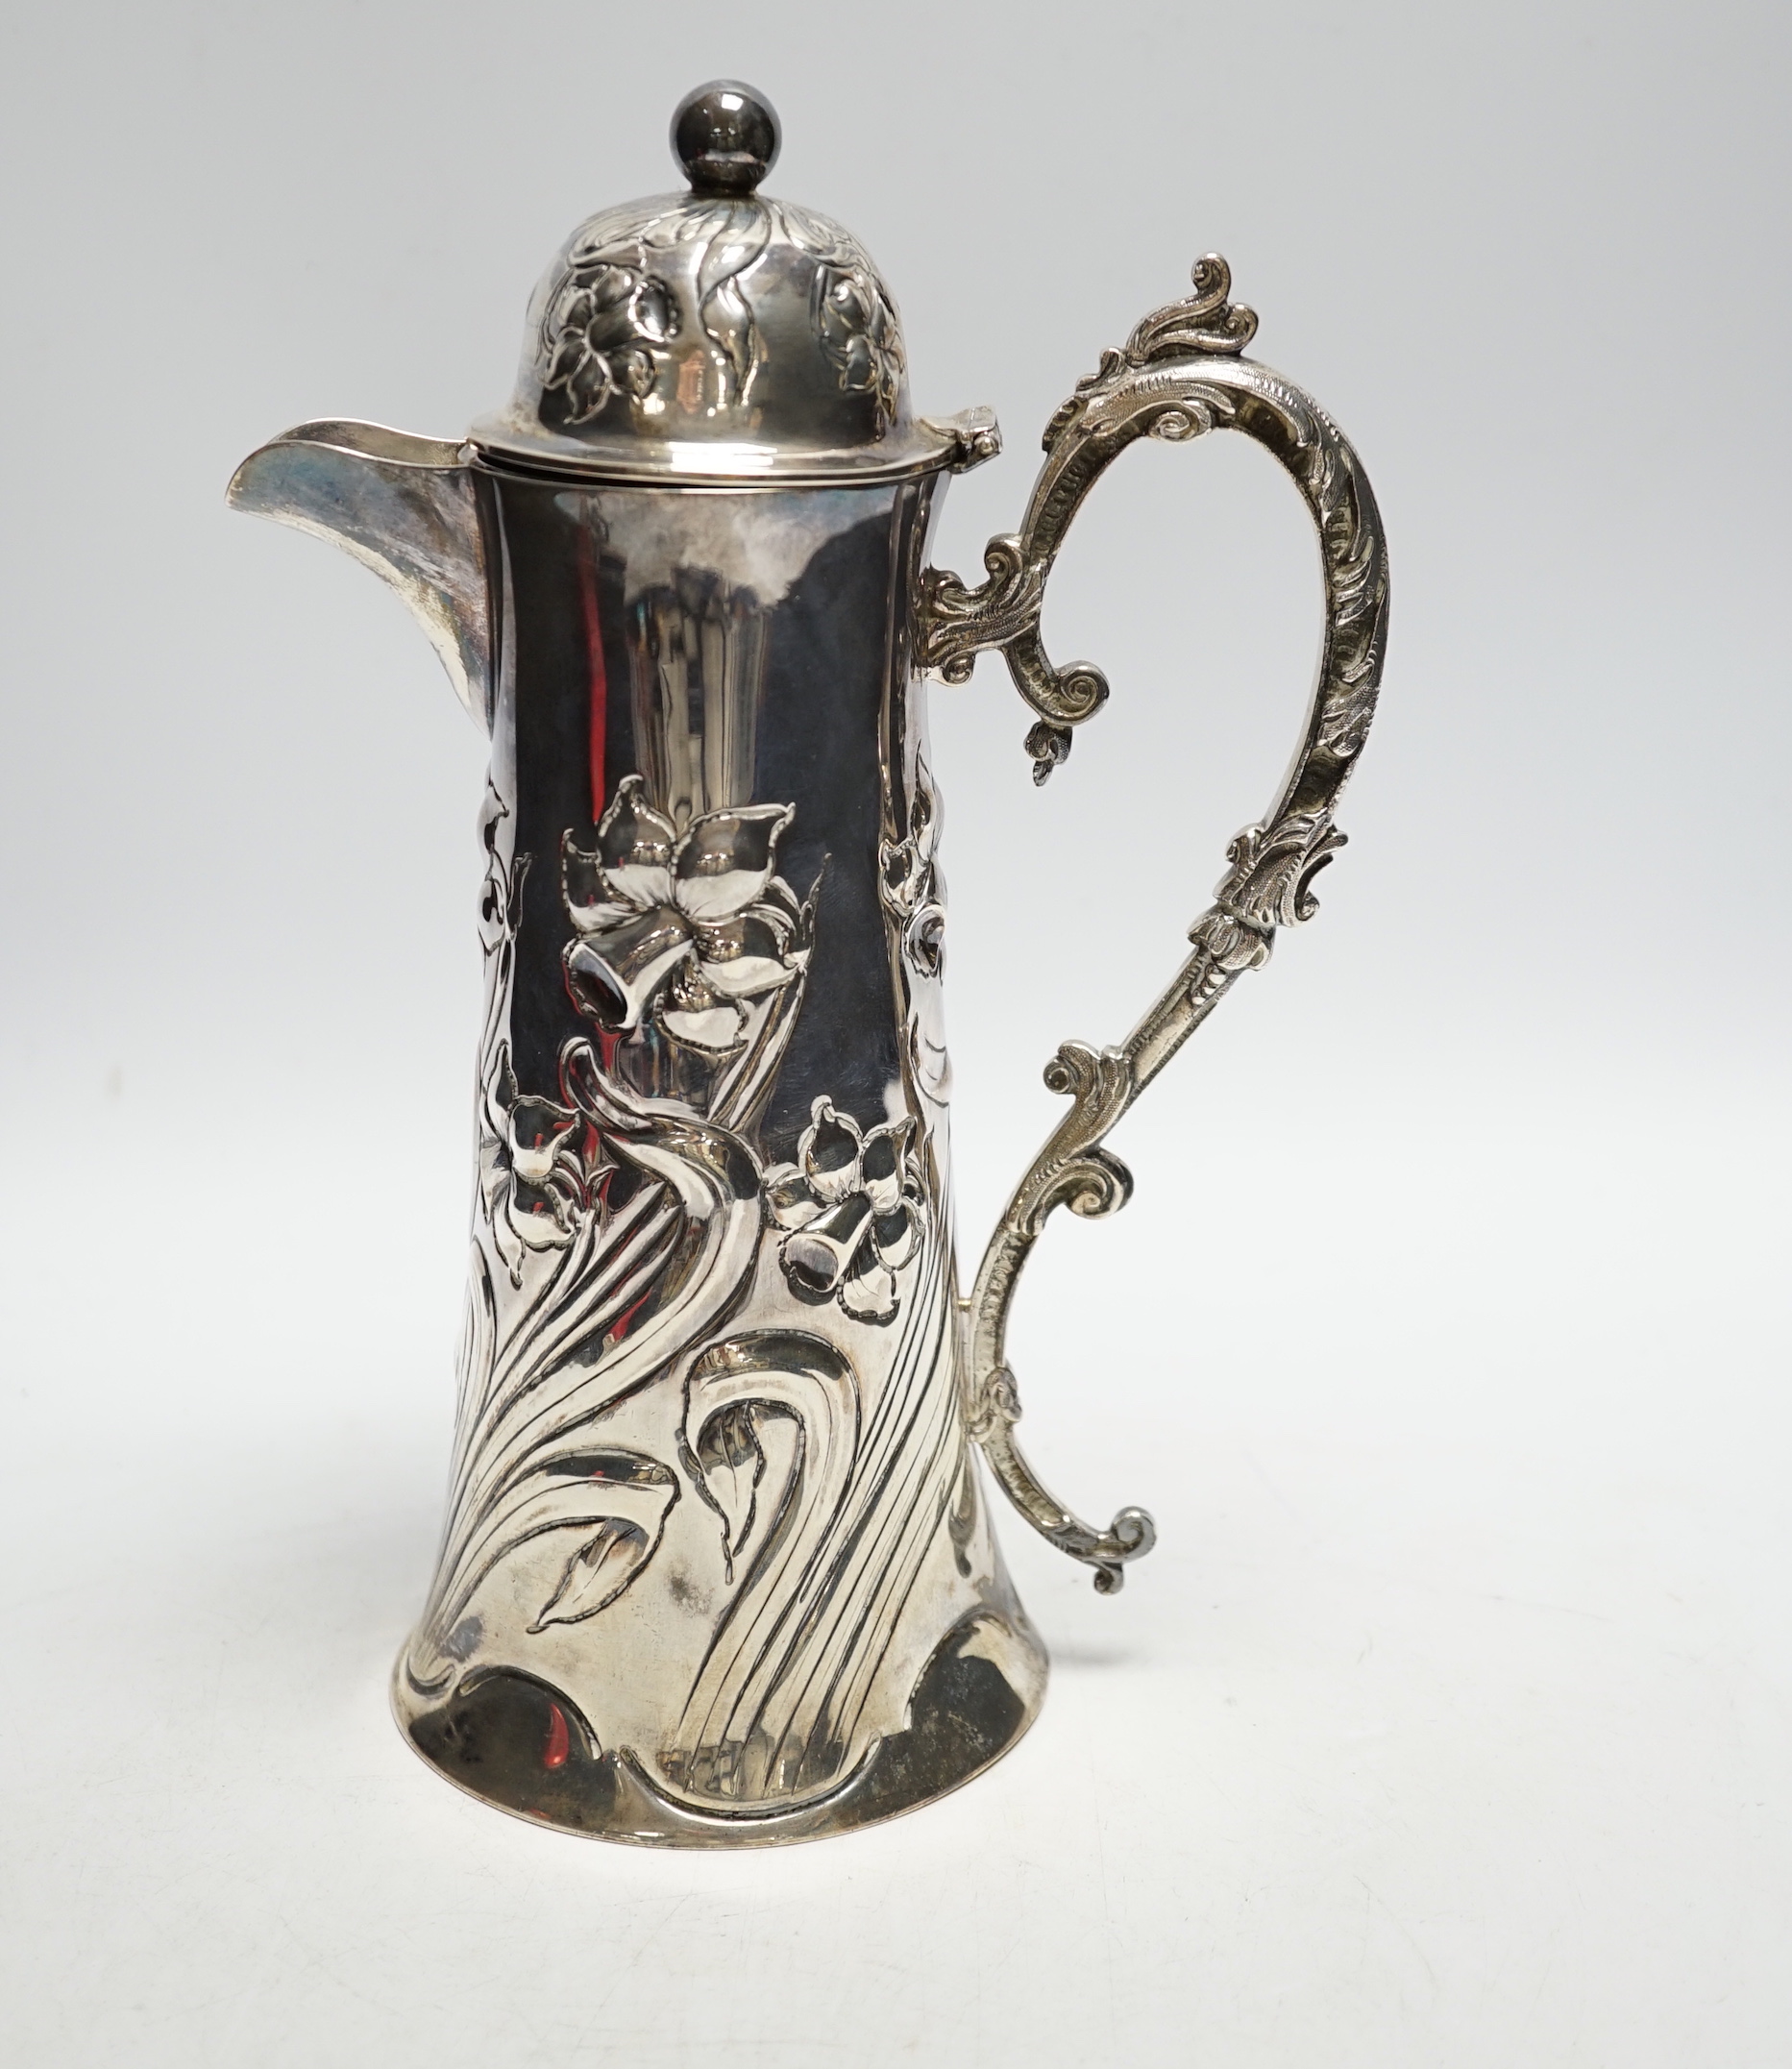 A late Victorian embossed silver jug, John Henry Potter, Sheffield, 1900, height 24.8cm, with replaced plated handle?, gross weight 22.6oz.